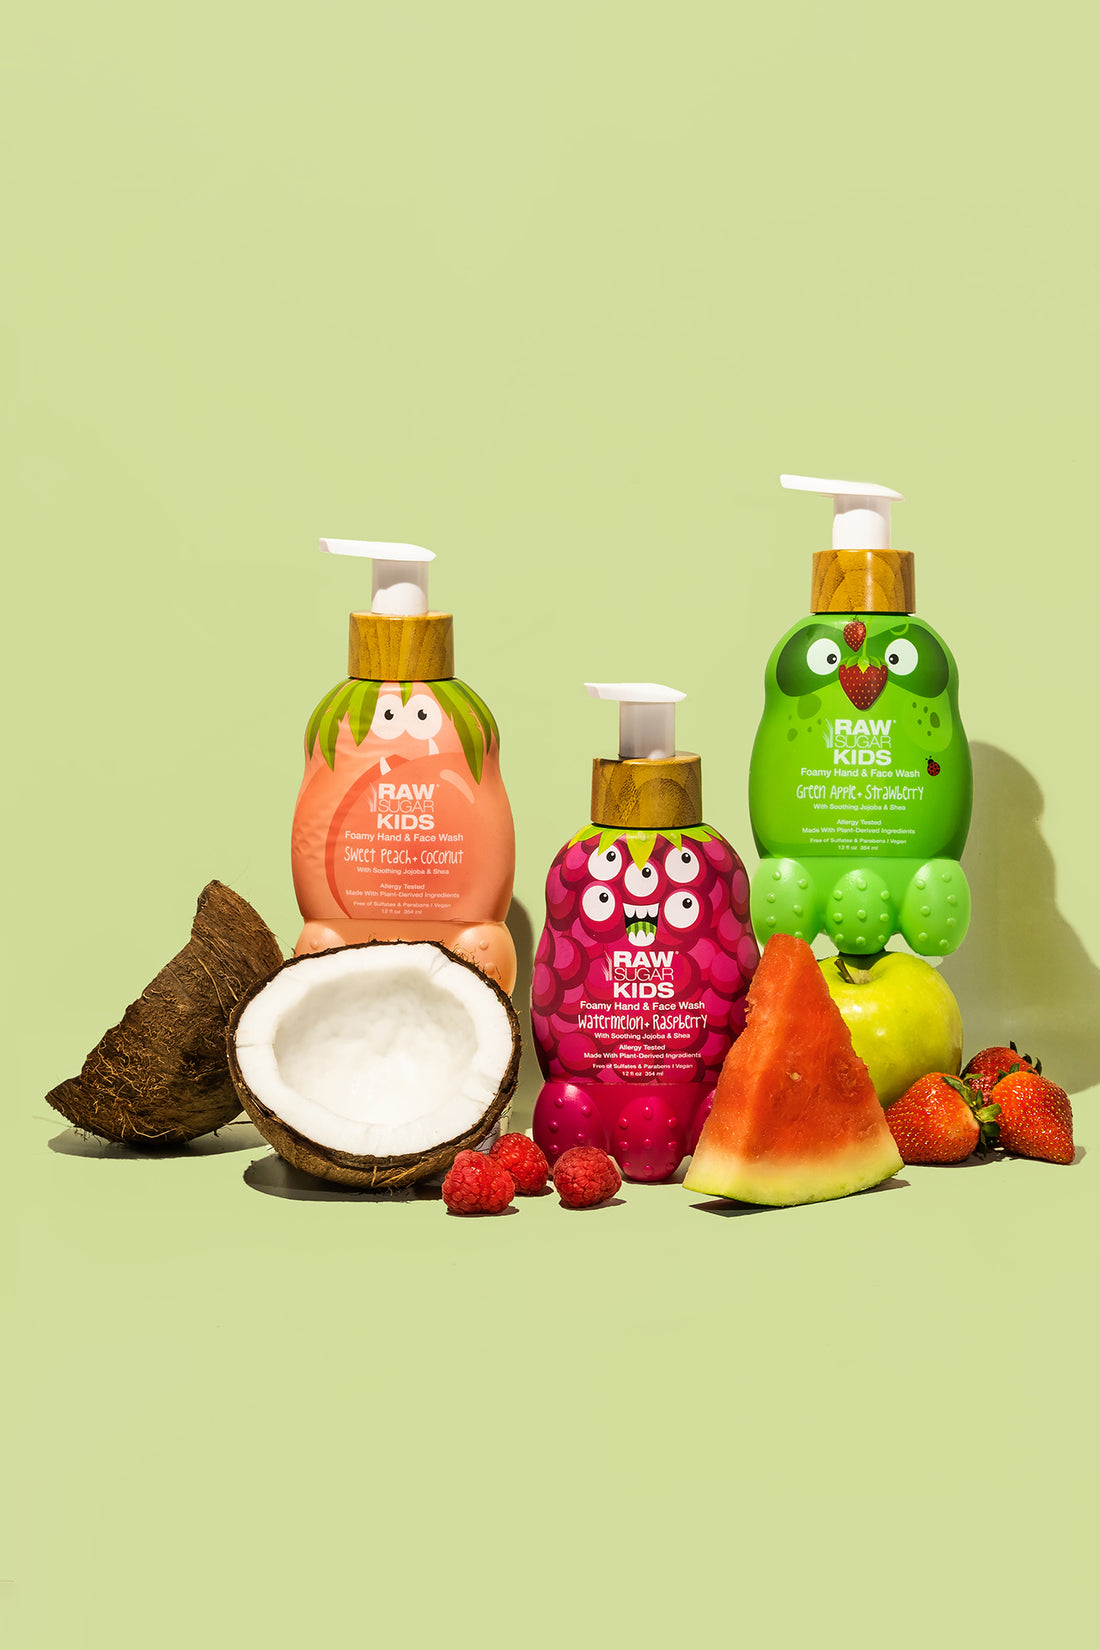 All 3 Raw Sugar Kids Face Foamy Hand + Face Washes with halved Raw Coconut, fresh strawberries. green apple and watermelon